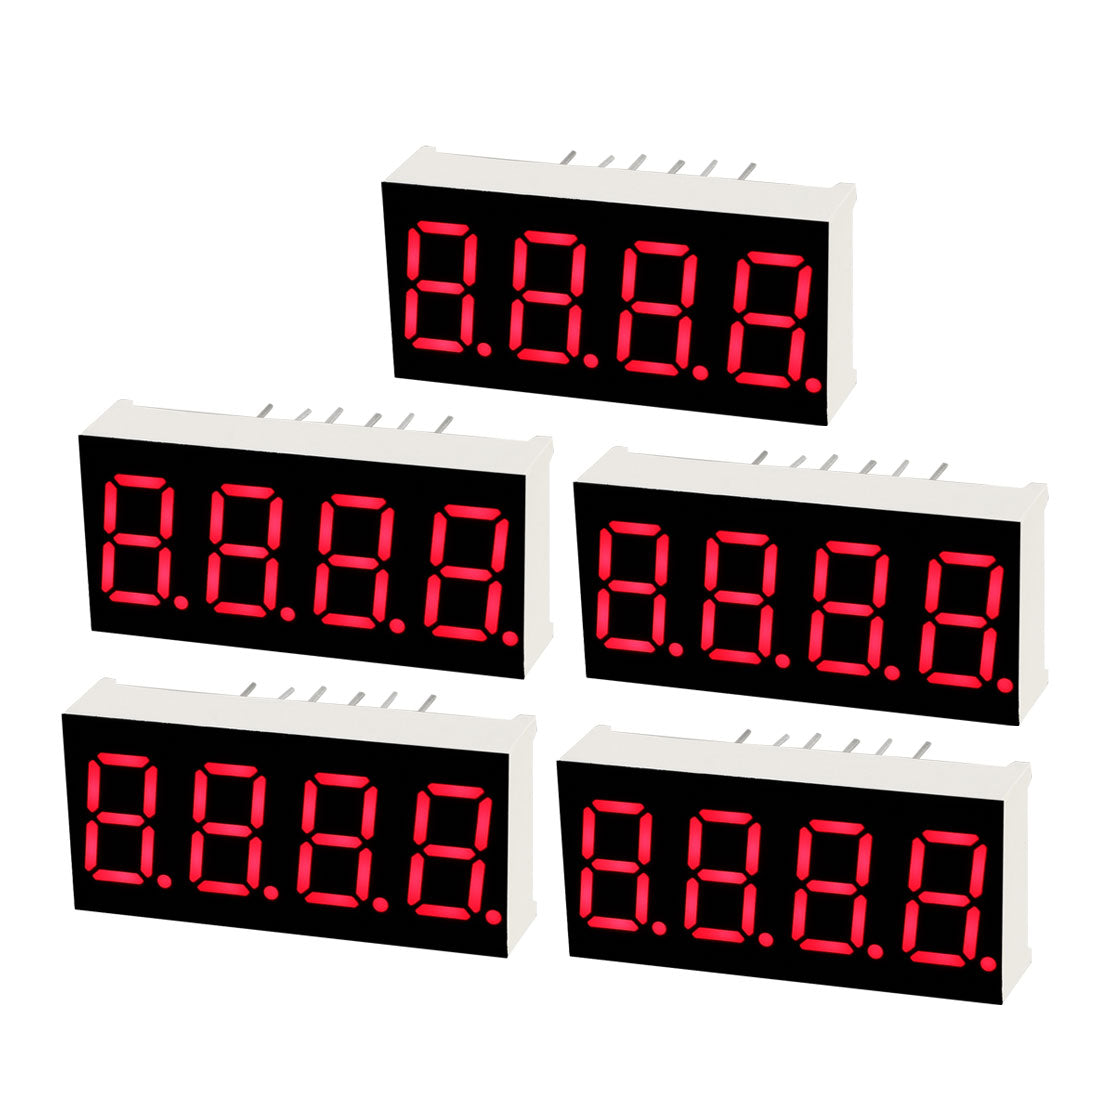 uxcell Uxcell Common Cathode 12 Pin 4 Bit 7 Segment 1.18 x 0.55 x 0.28 Inch 0.35" Red LED Display Digital Tube 5pcs